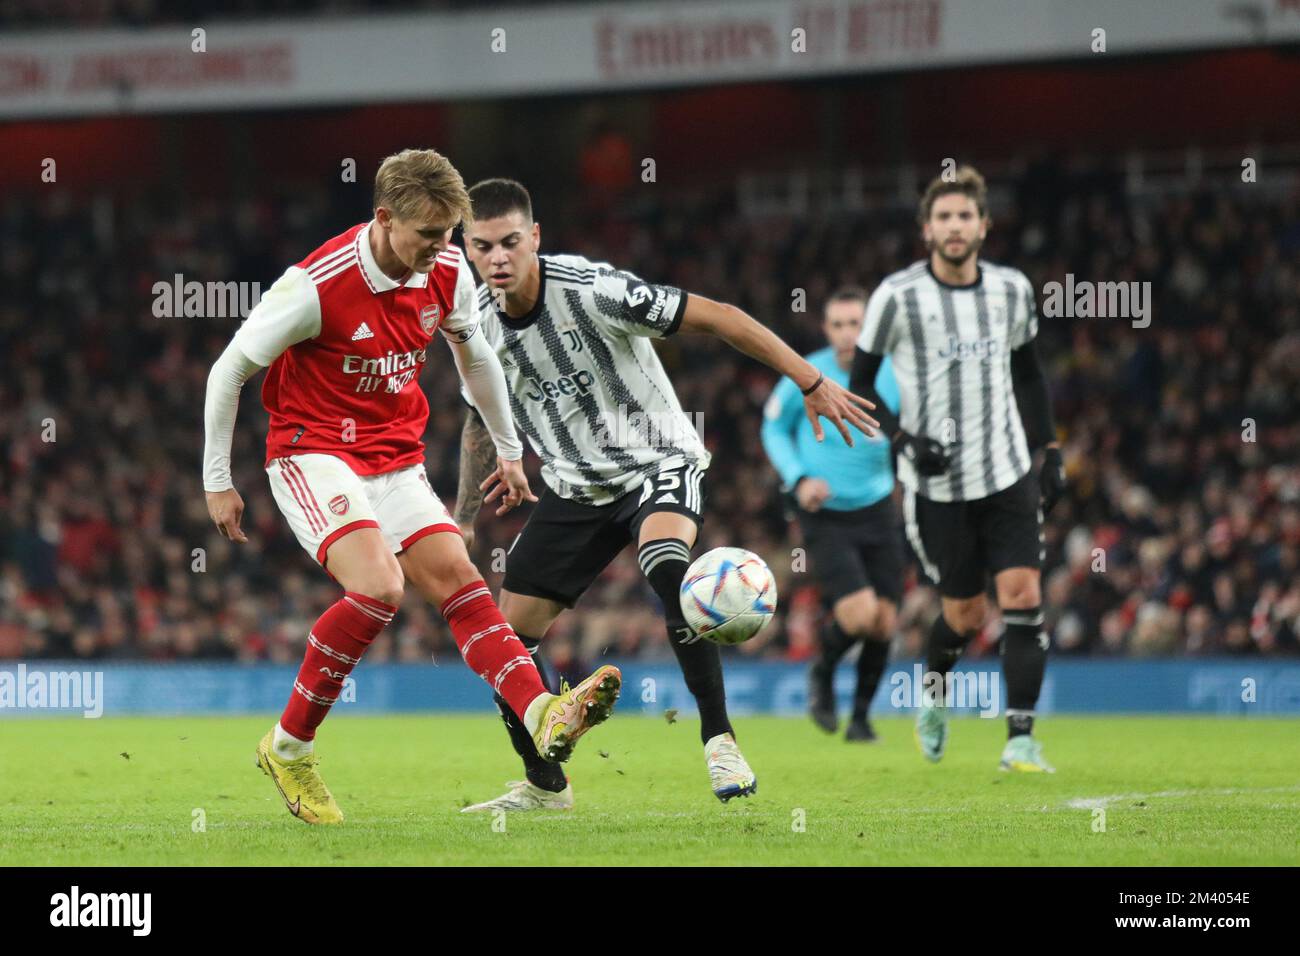 London, UK. 17th Dec, 2022. Manuel Locatelli of Juventus during the Club  Friendly match between Arsenal and Juventus at the Emirates Stadium,  London, England on 17 December 2022. Photo by Joshua Smith.